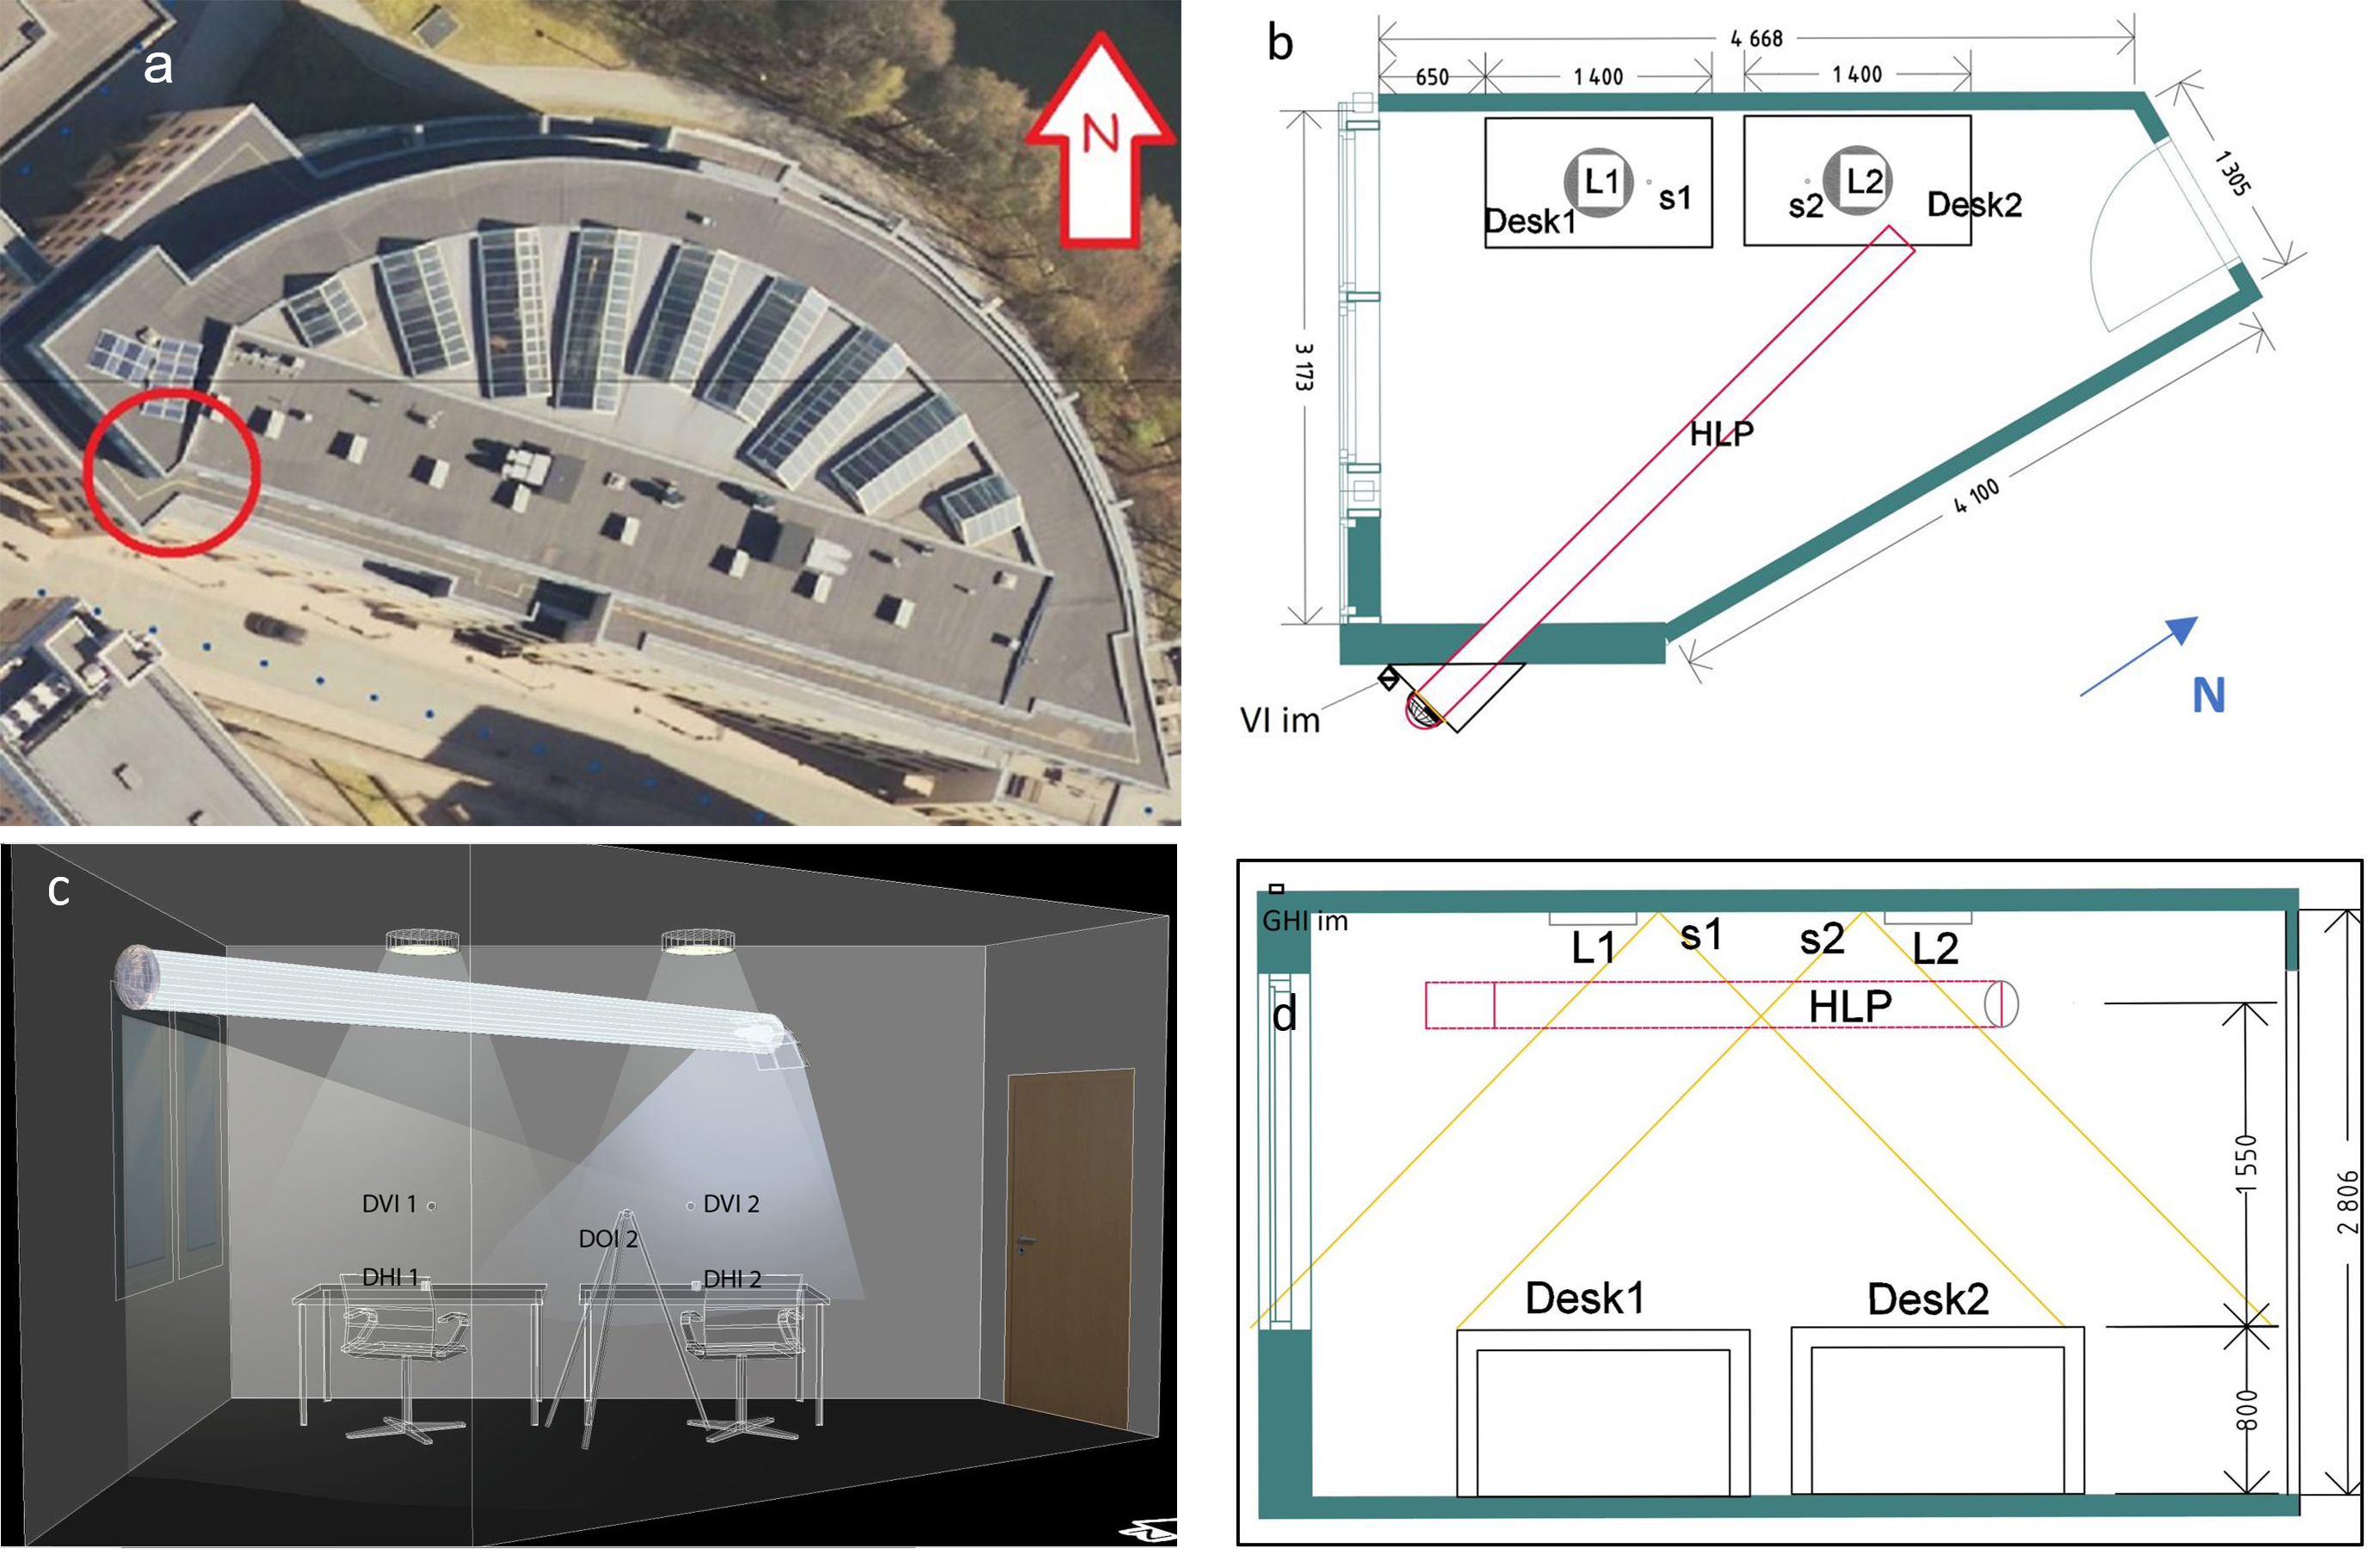 Full-scale test office. (a) Situation plan of the Norconsult Headquarters in Sandvika; (b) plan of the test office, VI im is the outdoor vertical illuminance meter; (c) model of the office with sources of illumination: window, HLP, and luminaires; position of the five indoor illuminance meters is indicated with DHI 1, DVI 1, DHI 2, DVI 2 and DOI 2; (d) section of the room, Desk 1 is closest to the window and desk 2 is closest to the door. The HLP exit is near the desk 2 and the custom-designed reflector direct the daylight to the desk 2. Desk 1 is to be lit by artificial lighting from luminaire 1 (L1), and desk 2 from luminaire 2 (L2). S1 is the DLC sensor connected to L1, and S2 is the sensor connected to L2. GHI im is the outdoor illuminance meter on the roof.